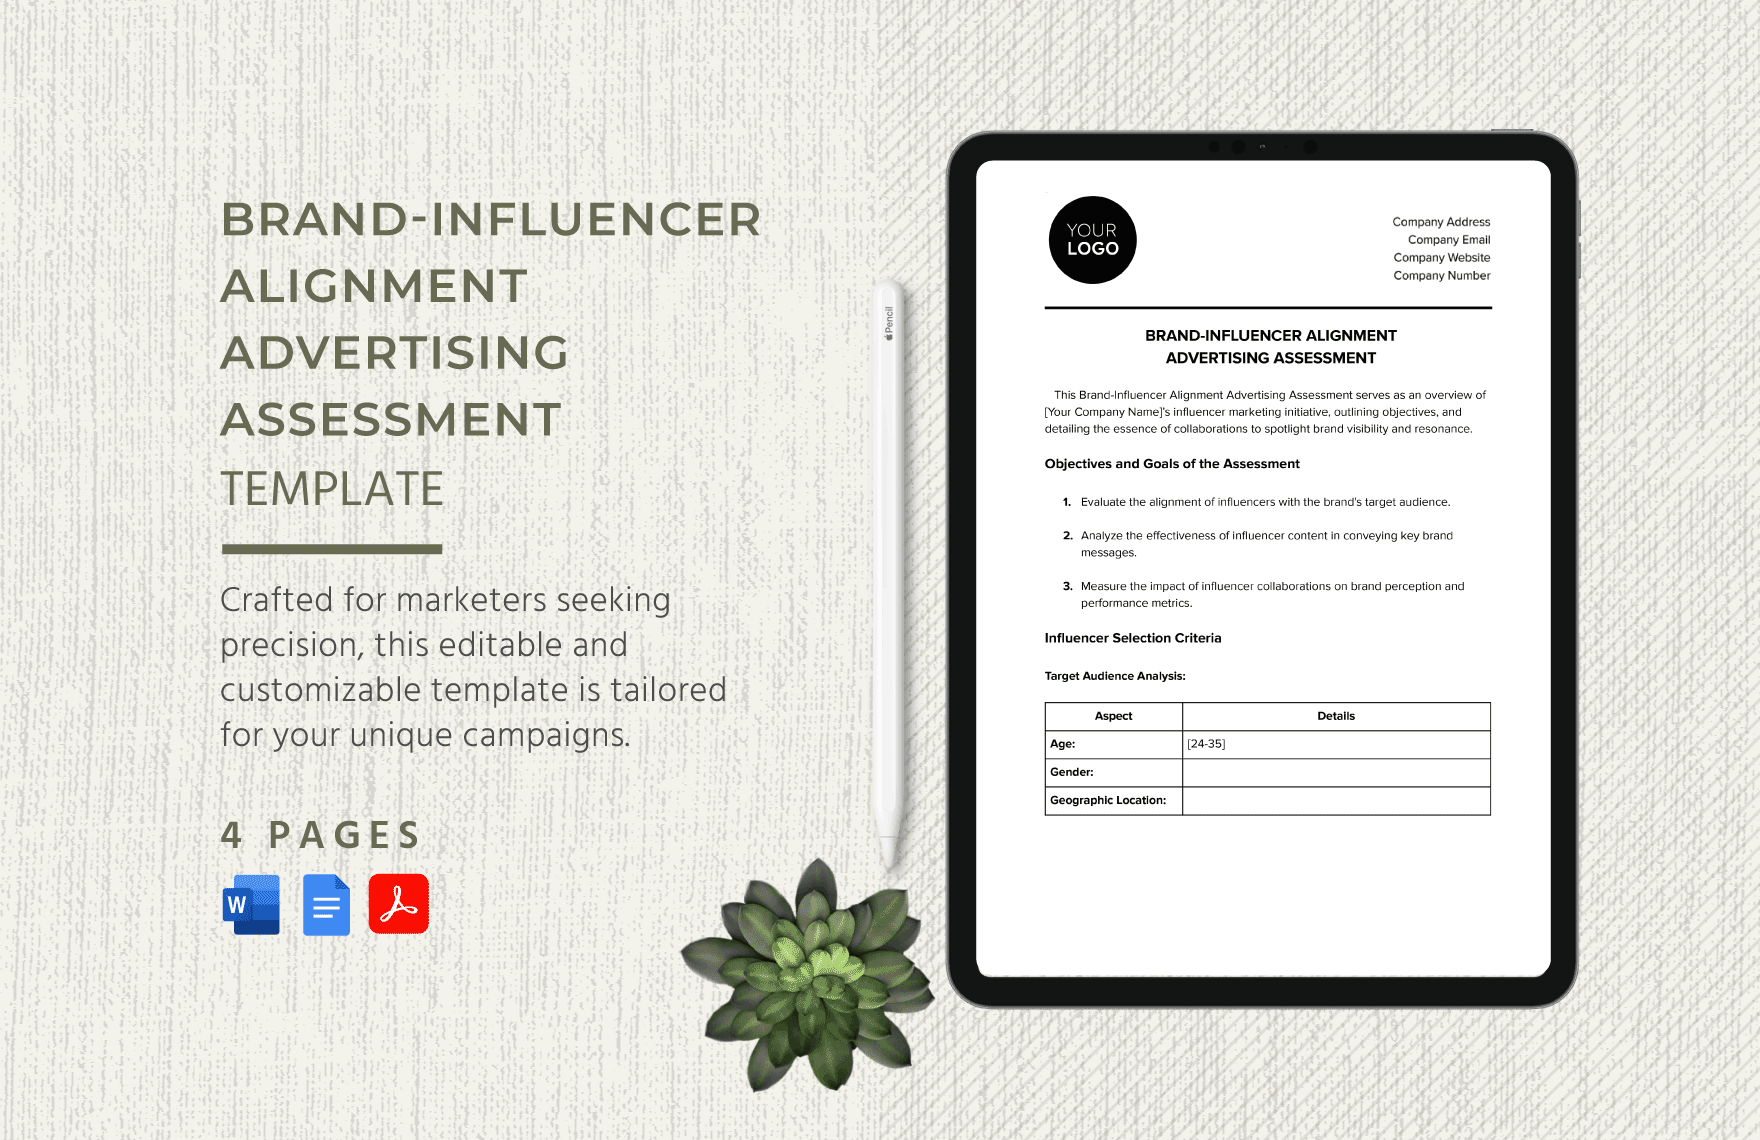 Brand-Influencer Alignment Advertising Assessment Template in Word, Google Docs, PDF